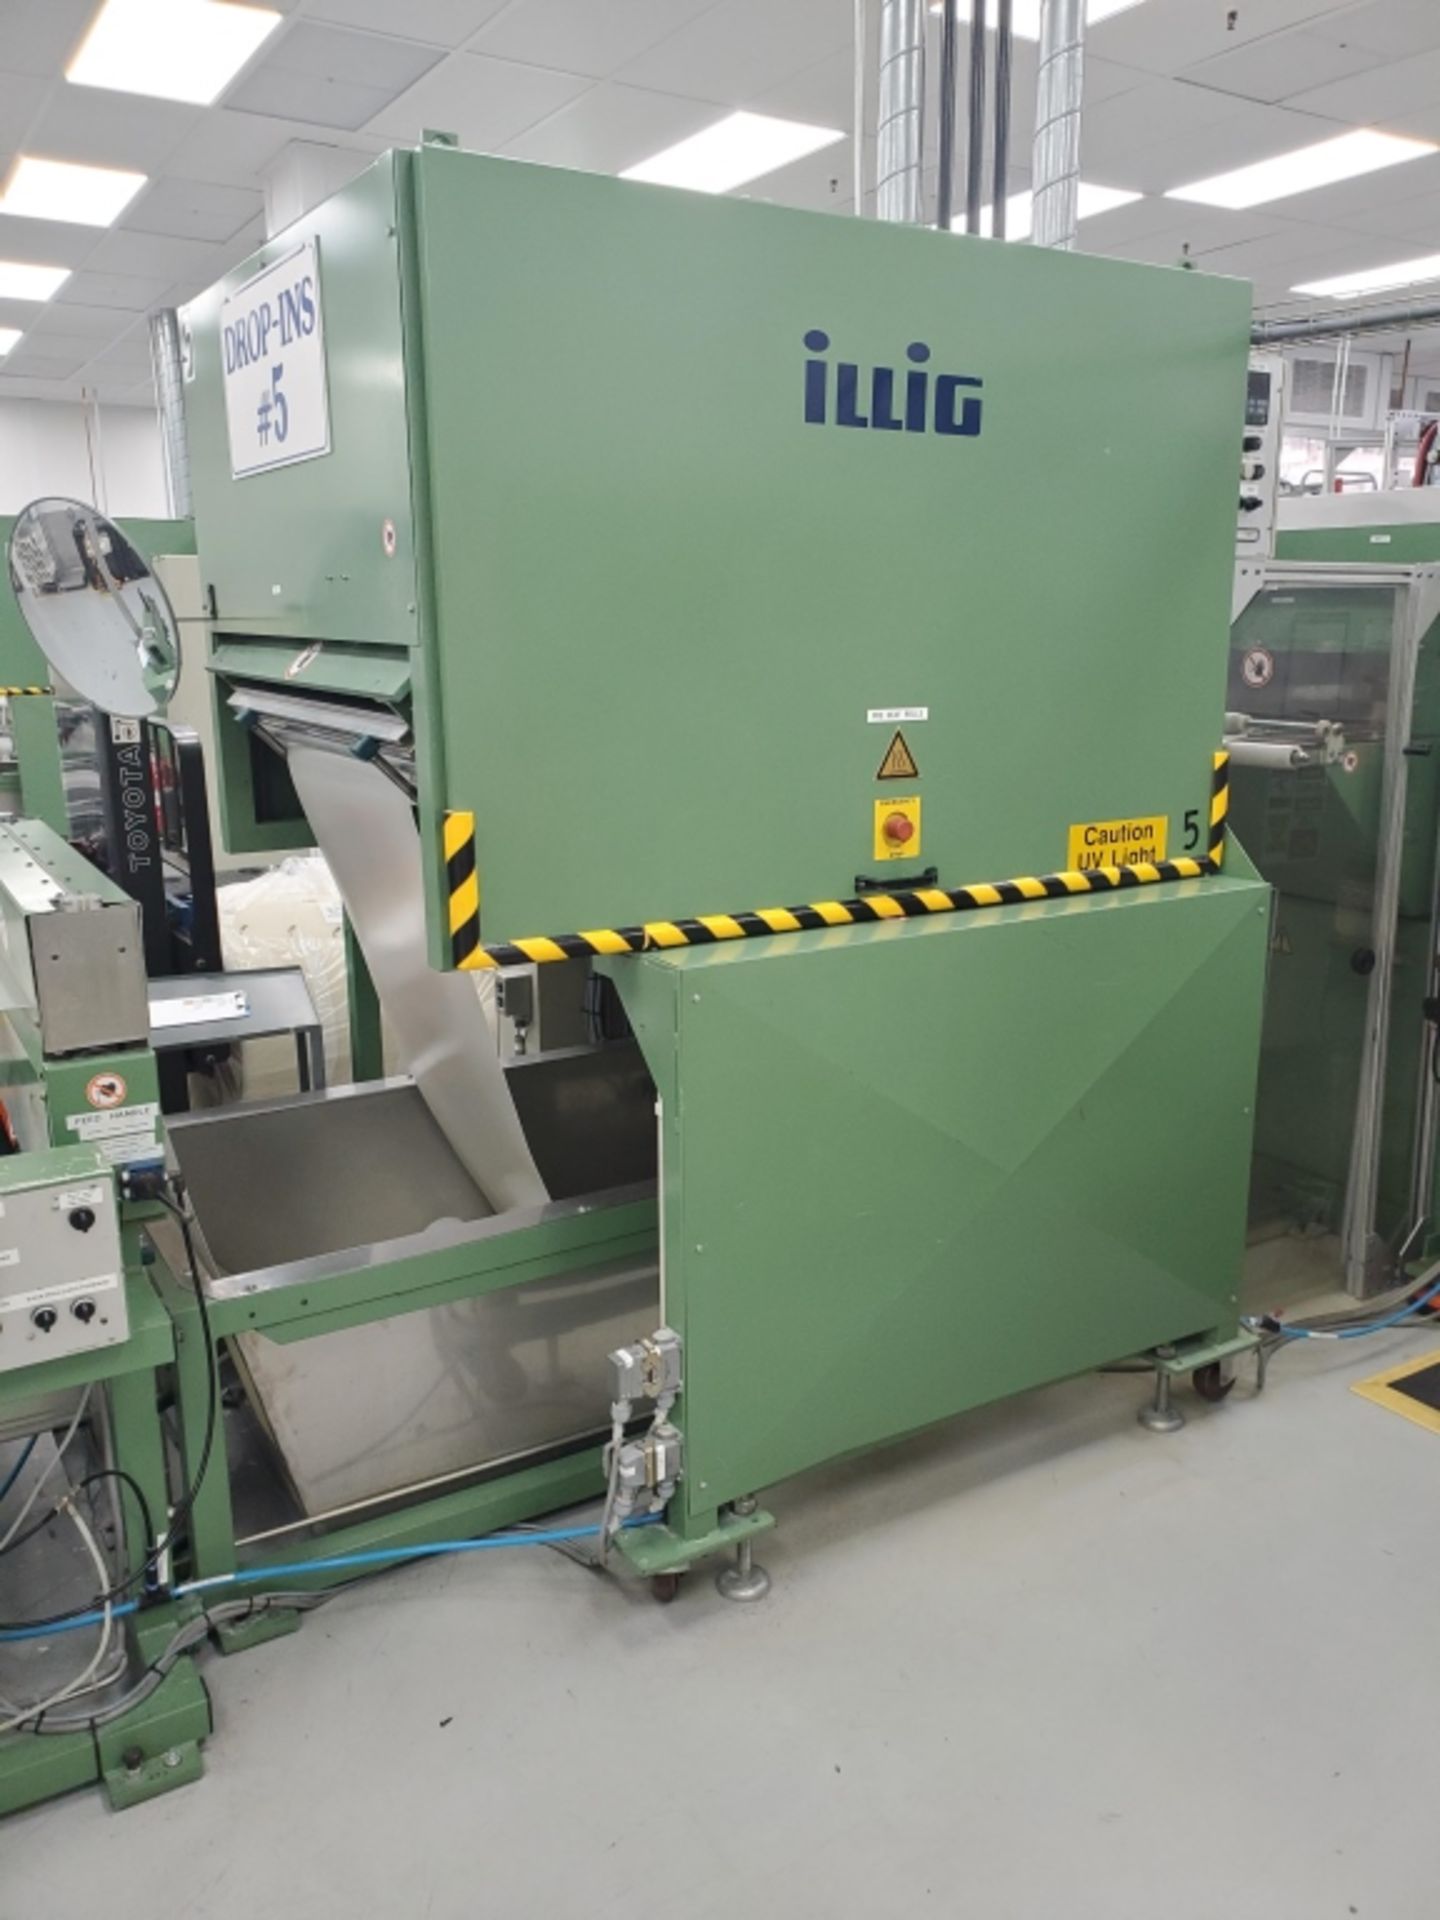 Illig Thermoforming Line #1 - Bulk Lot (Consisting of Lots 62-65) * See Auctioneers note* - Image 3 of 11